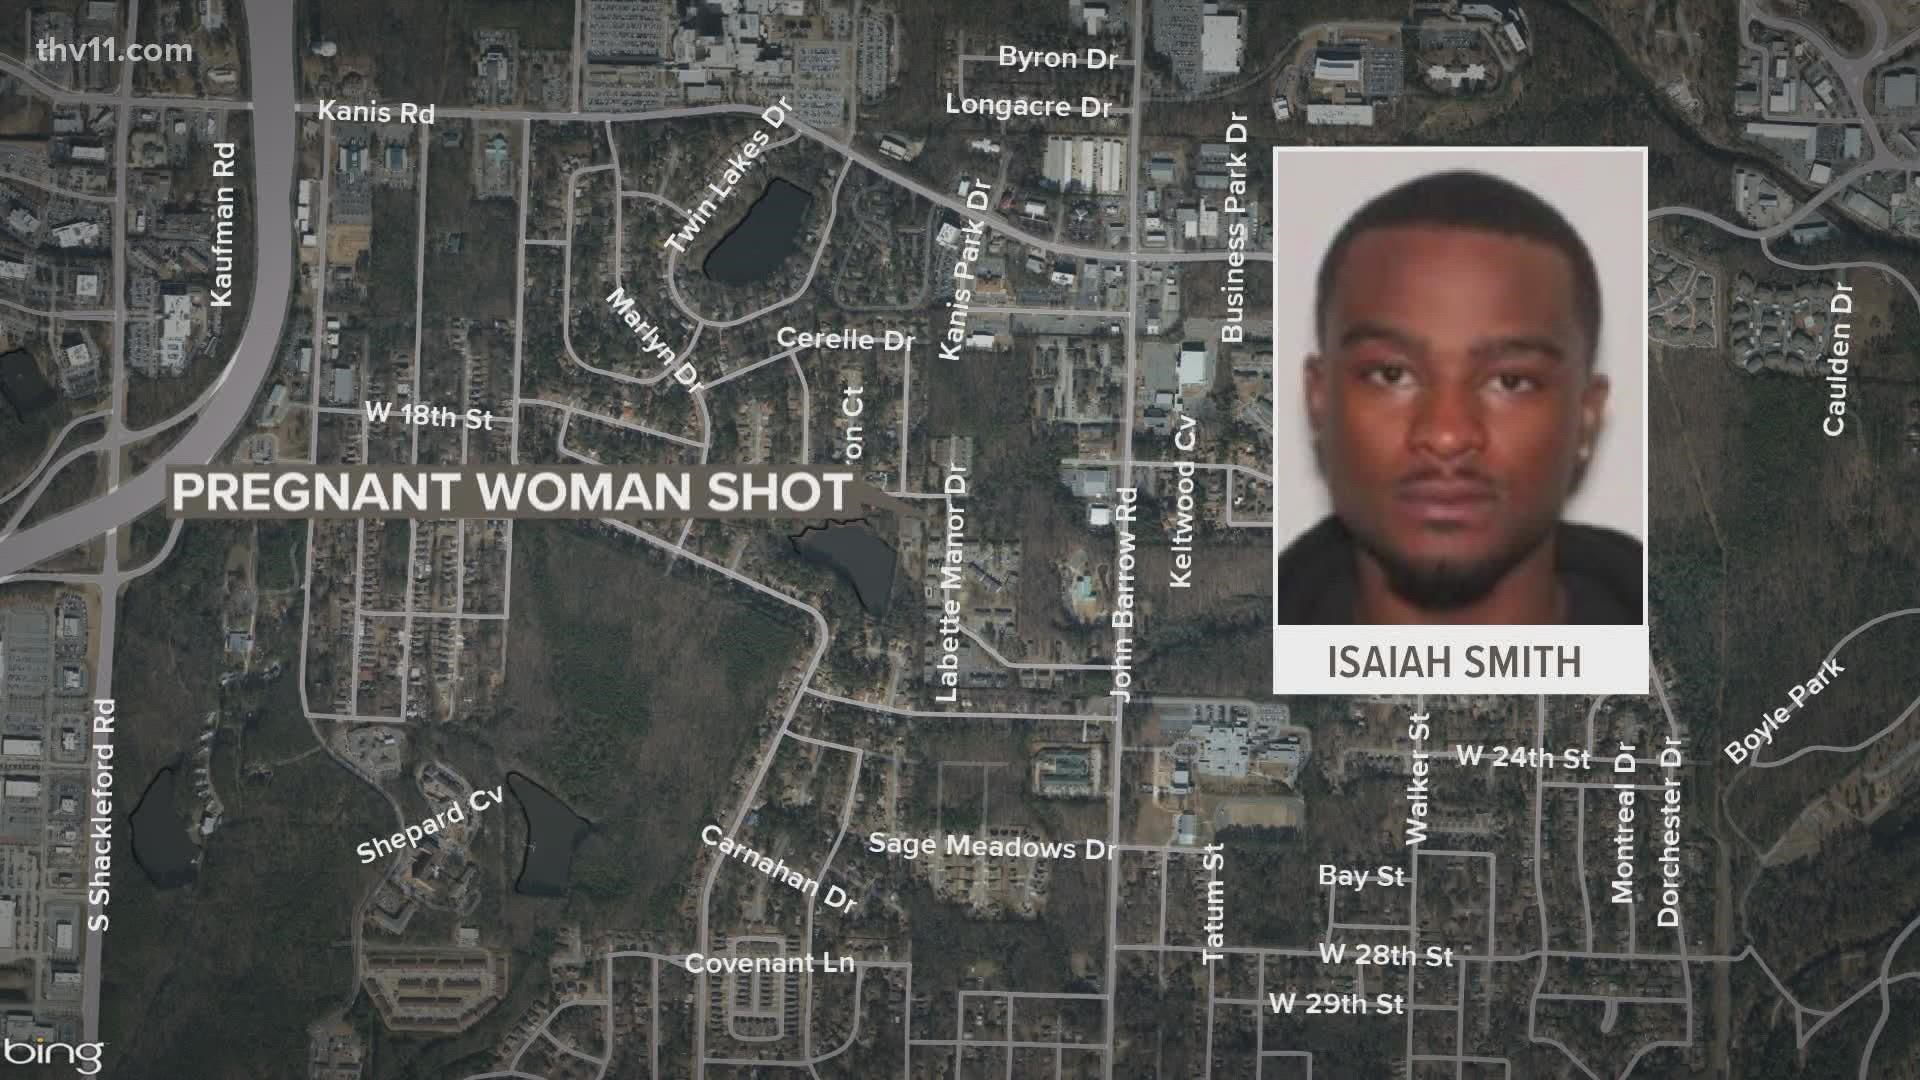 Police have identified the homicide victim as Isaiah Smith, who was previously wanted for shooting a pregnant woman where her 2 unborn children died.